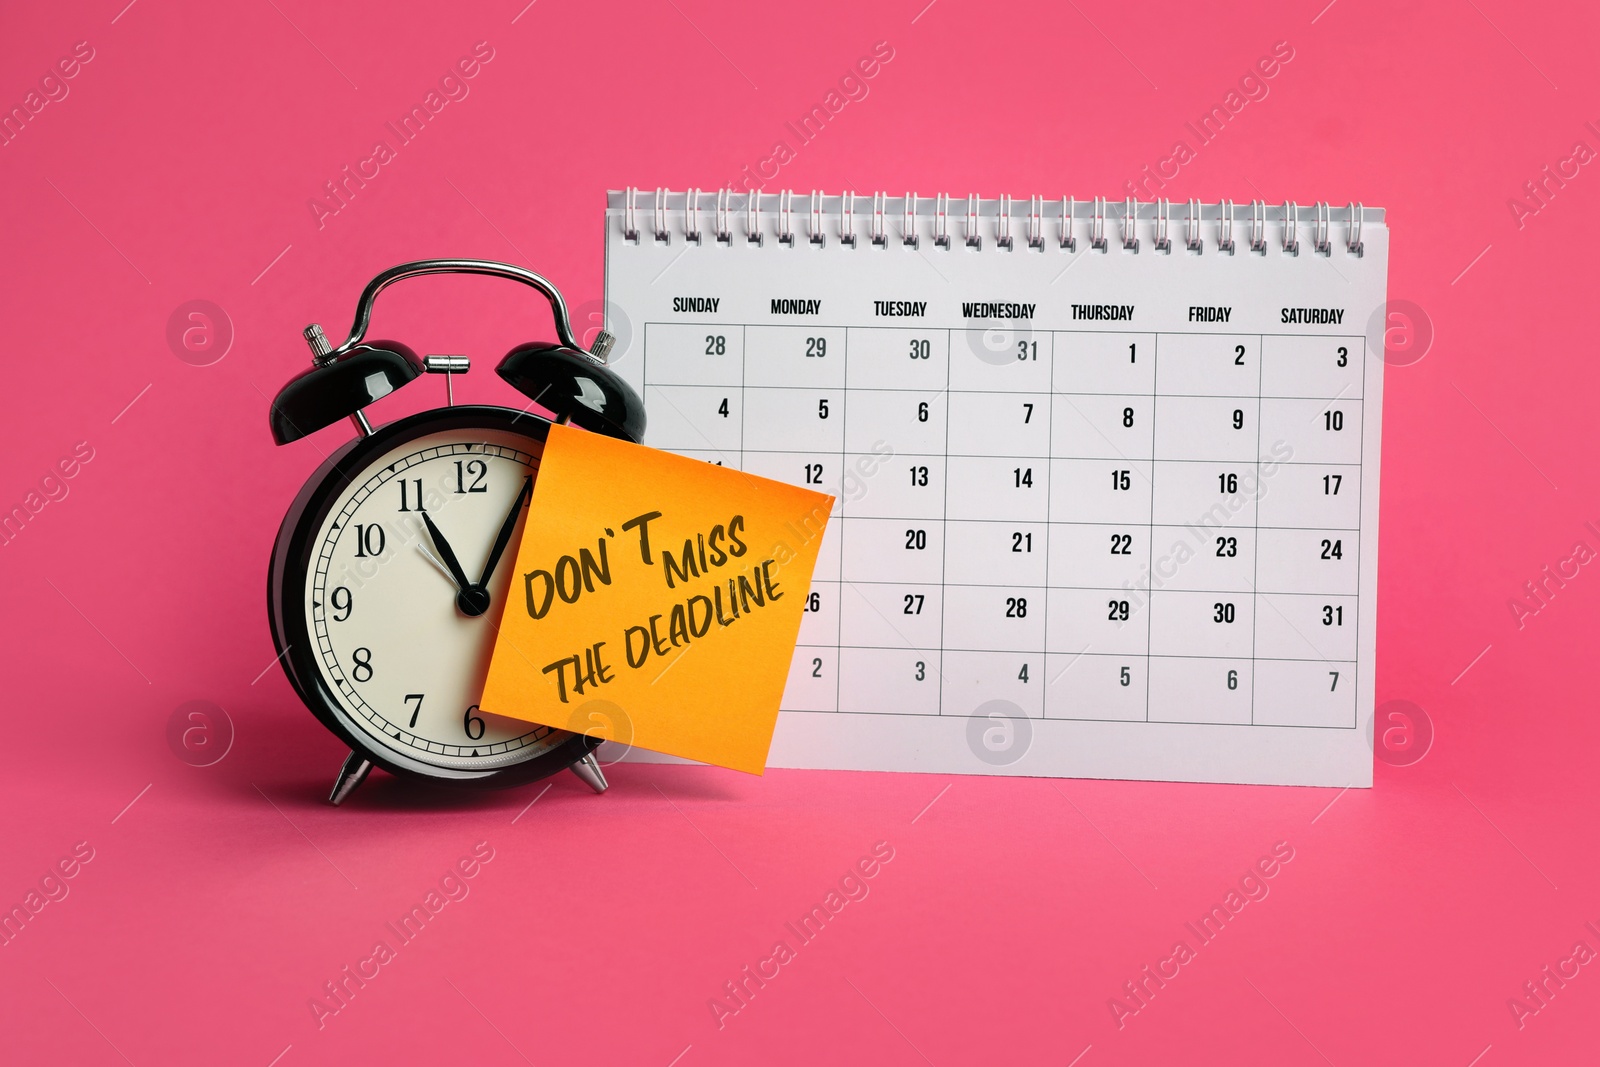 Image of Note with reminder Don't Miss The Deadline attached to alarm clock and calendar on pink background